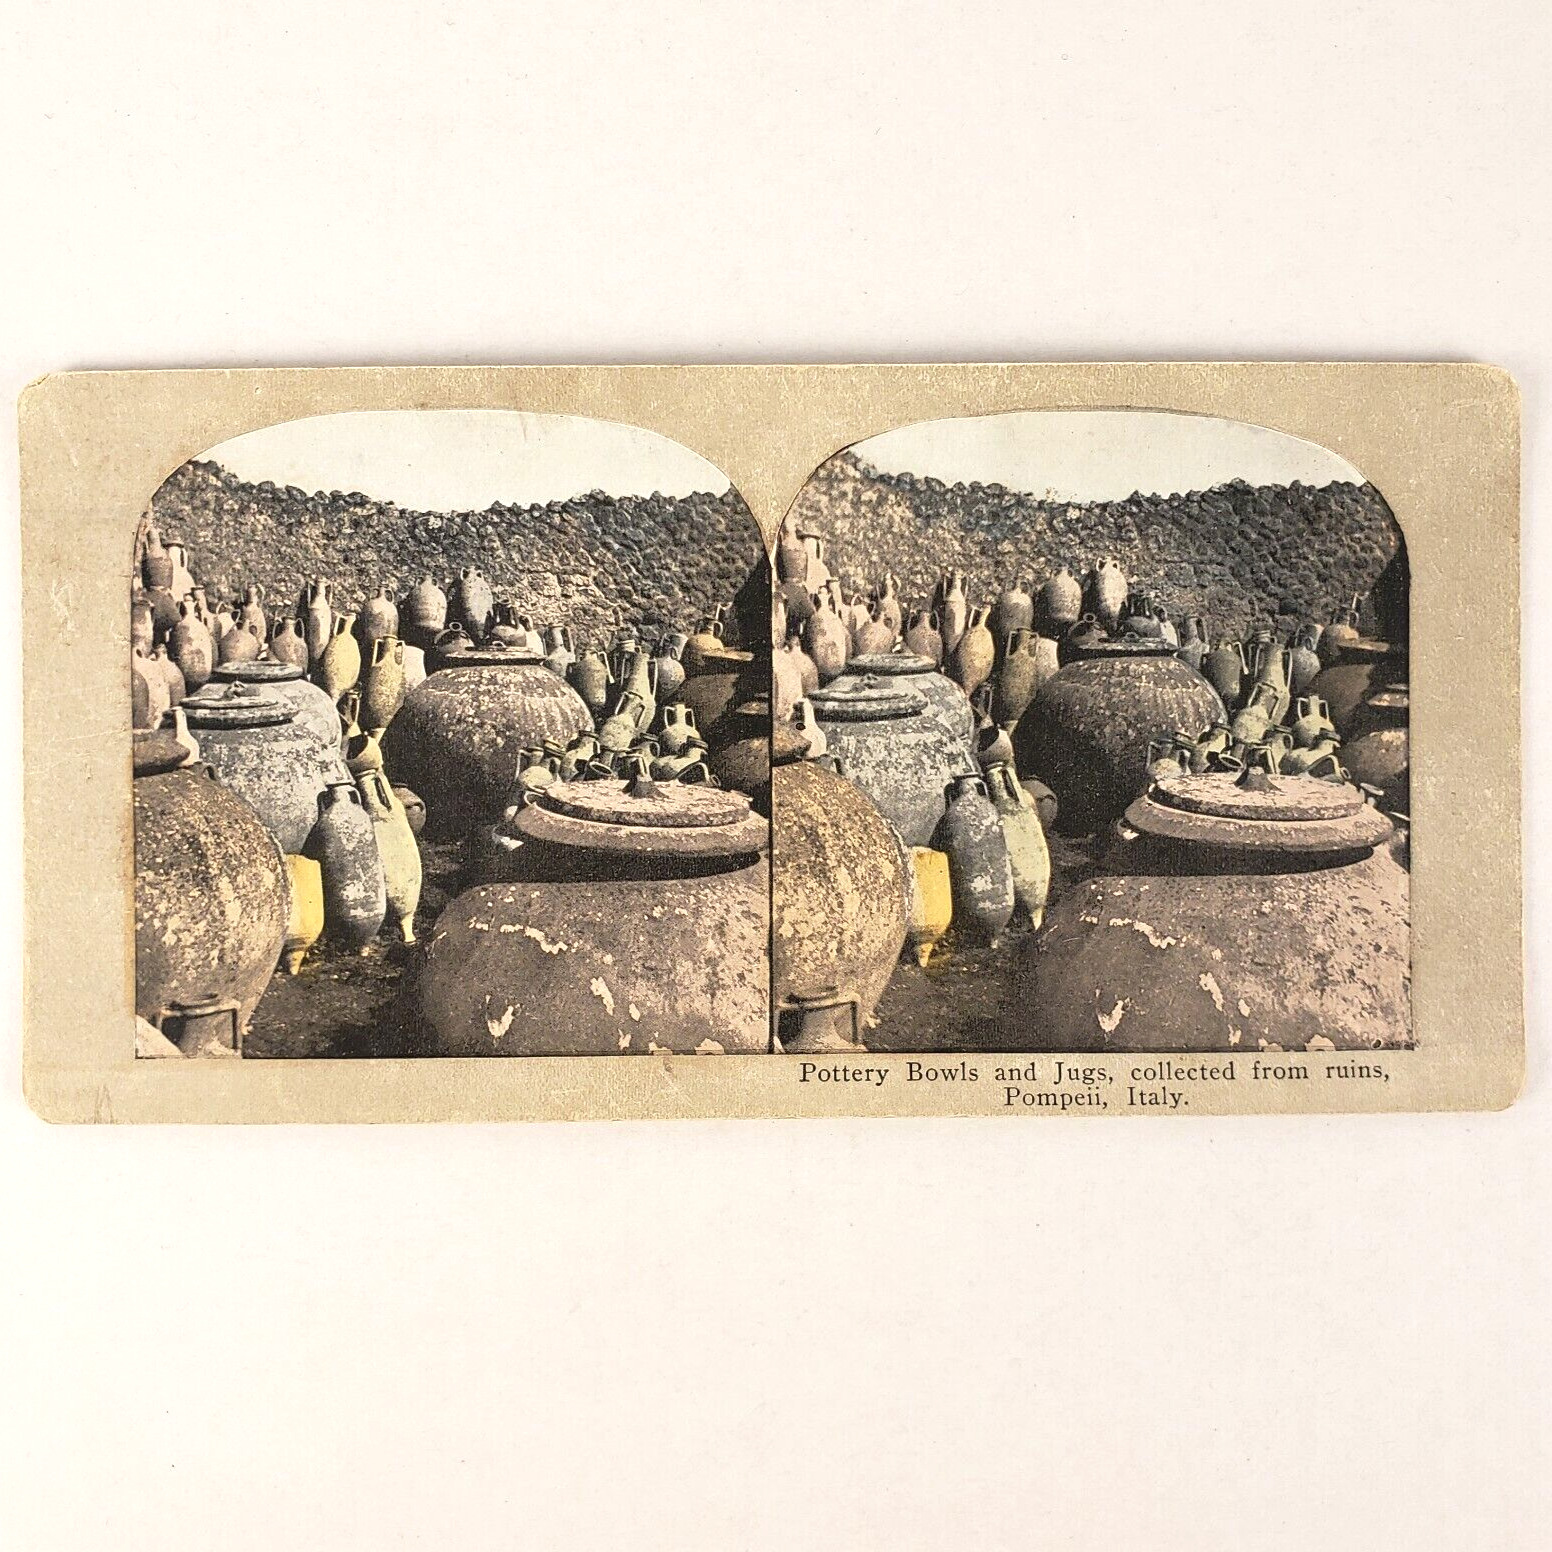 Pompeii Pottery Bowls Jugs Stereoview c1905 Disaster Ruins Italy Collection J51